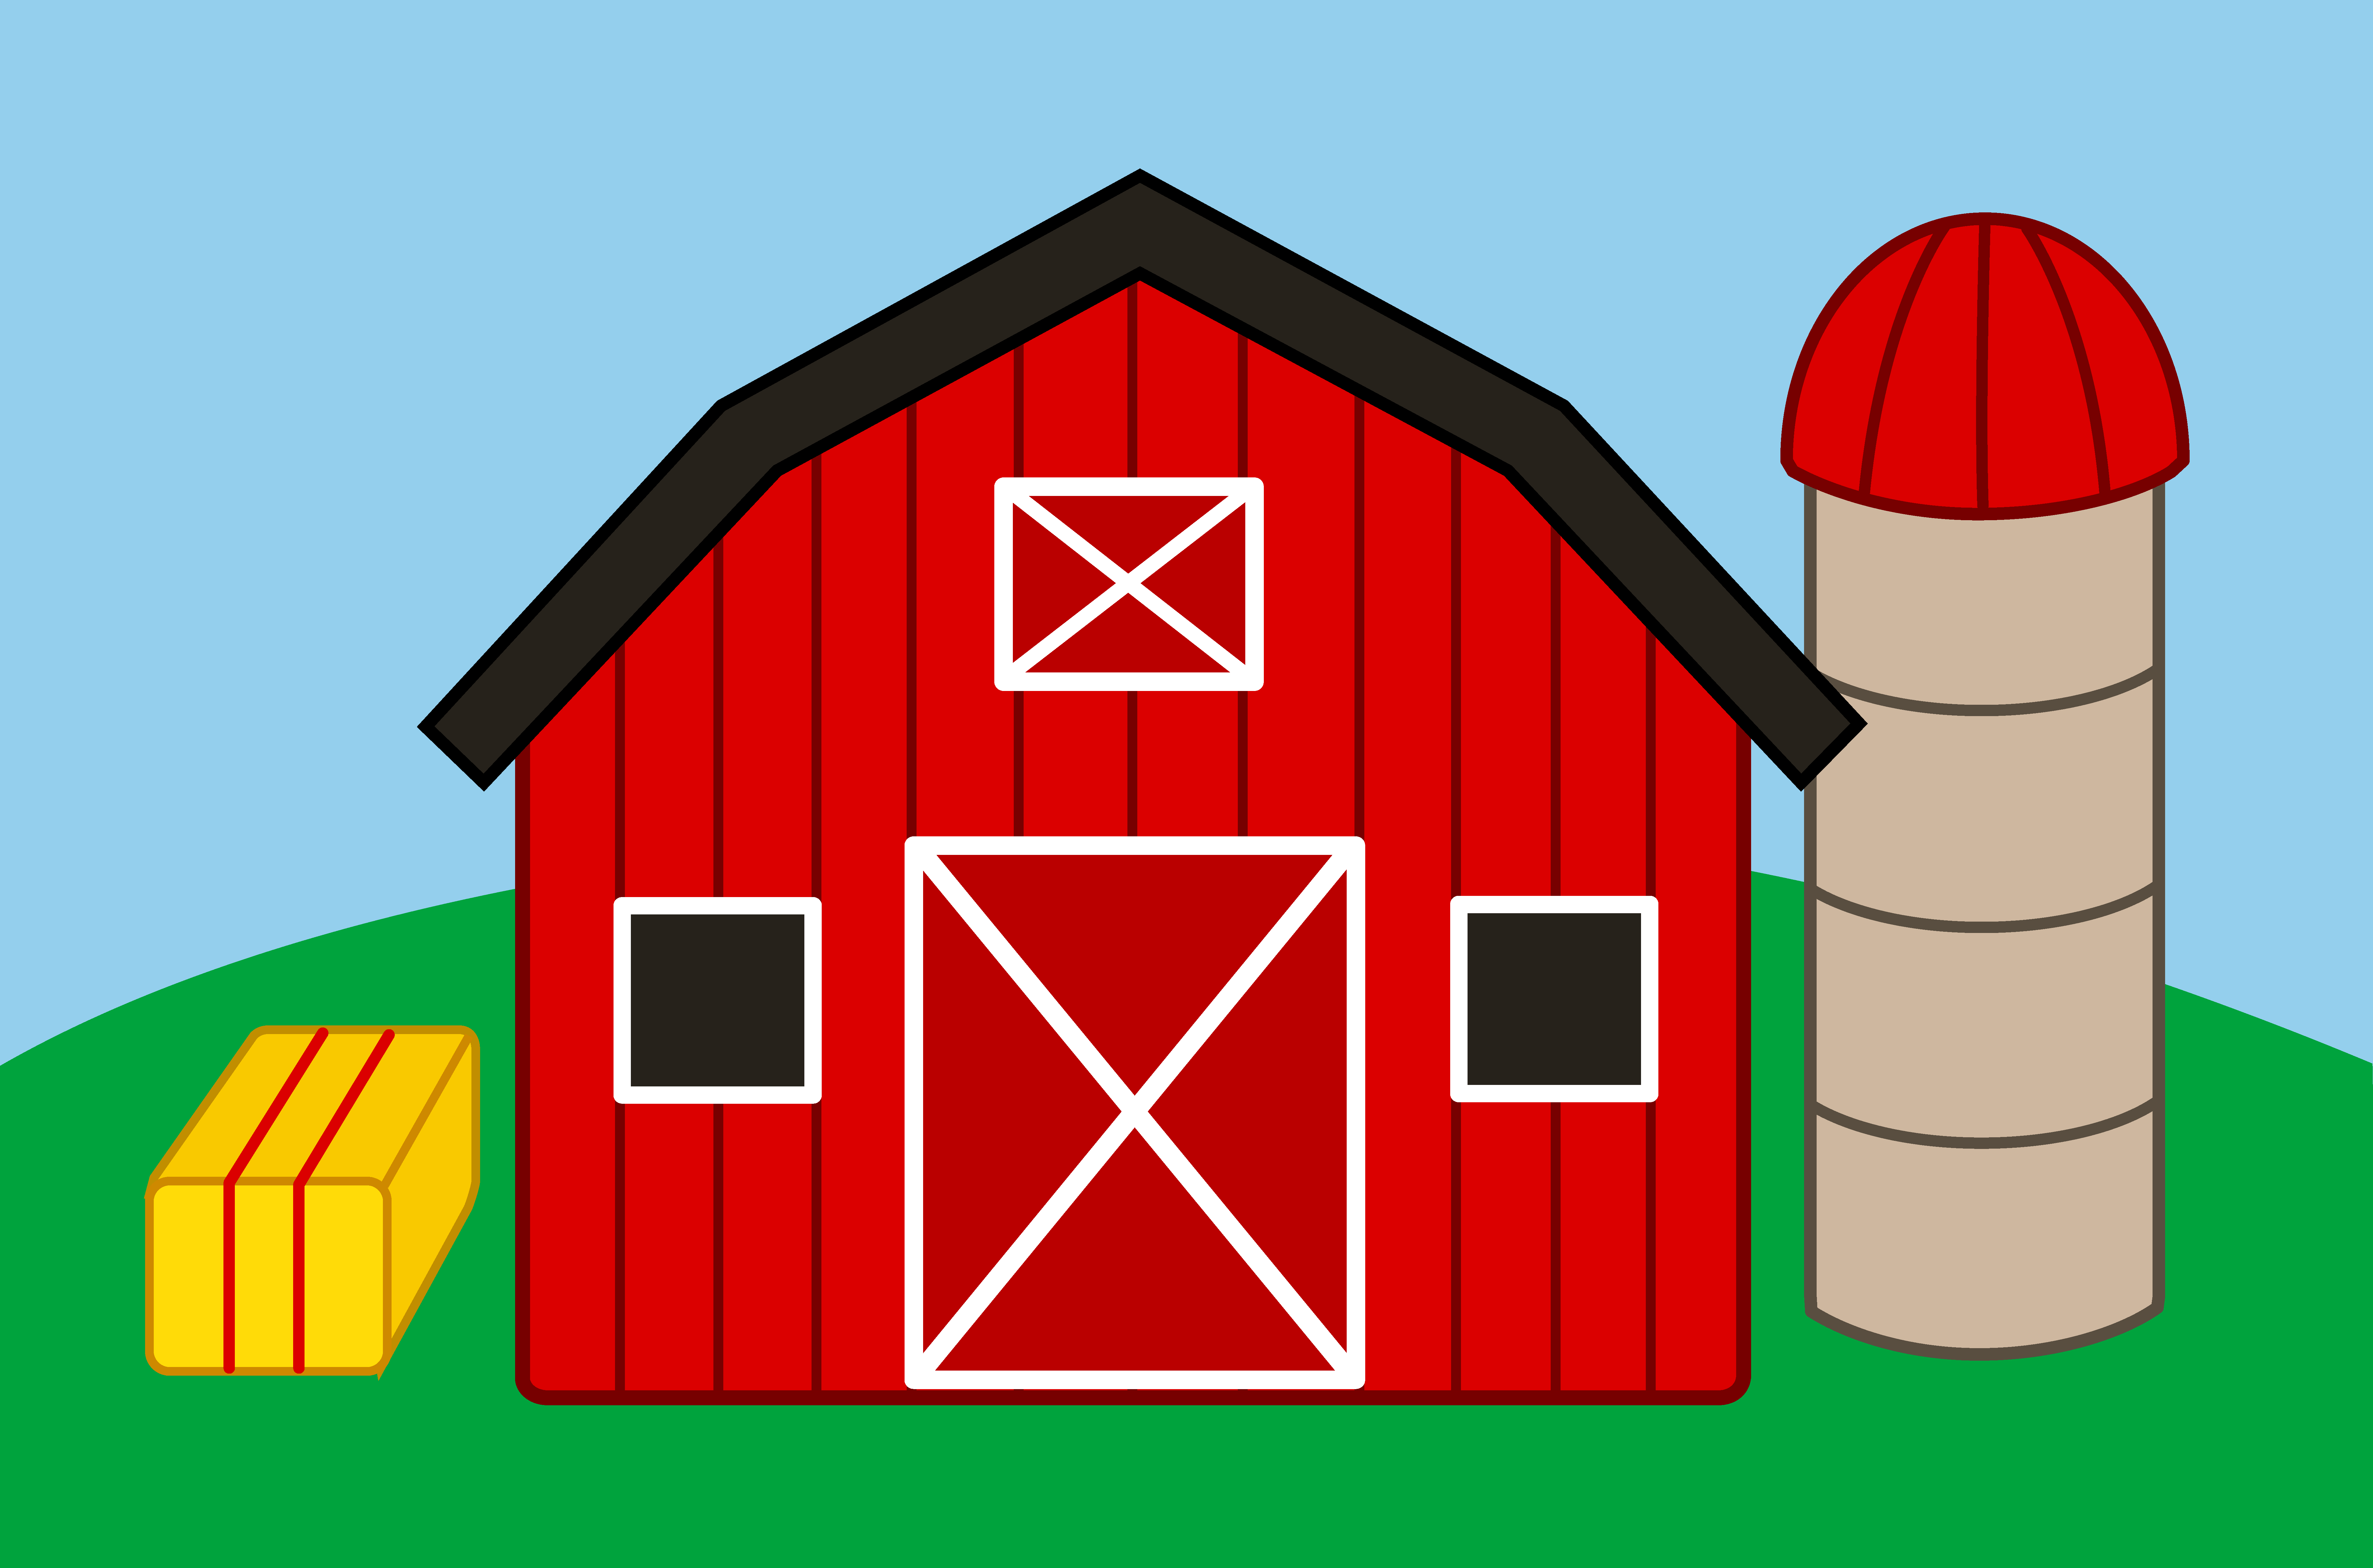 Cartoon Houses Png Hd - Cute Farm With Barn And Silo   Free Clip Art   Farm House Png Hd, Transparent background PNG HD thumbnail